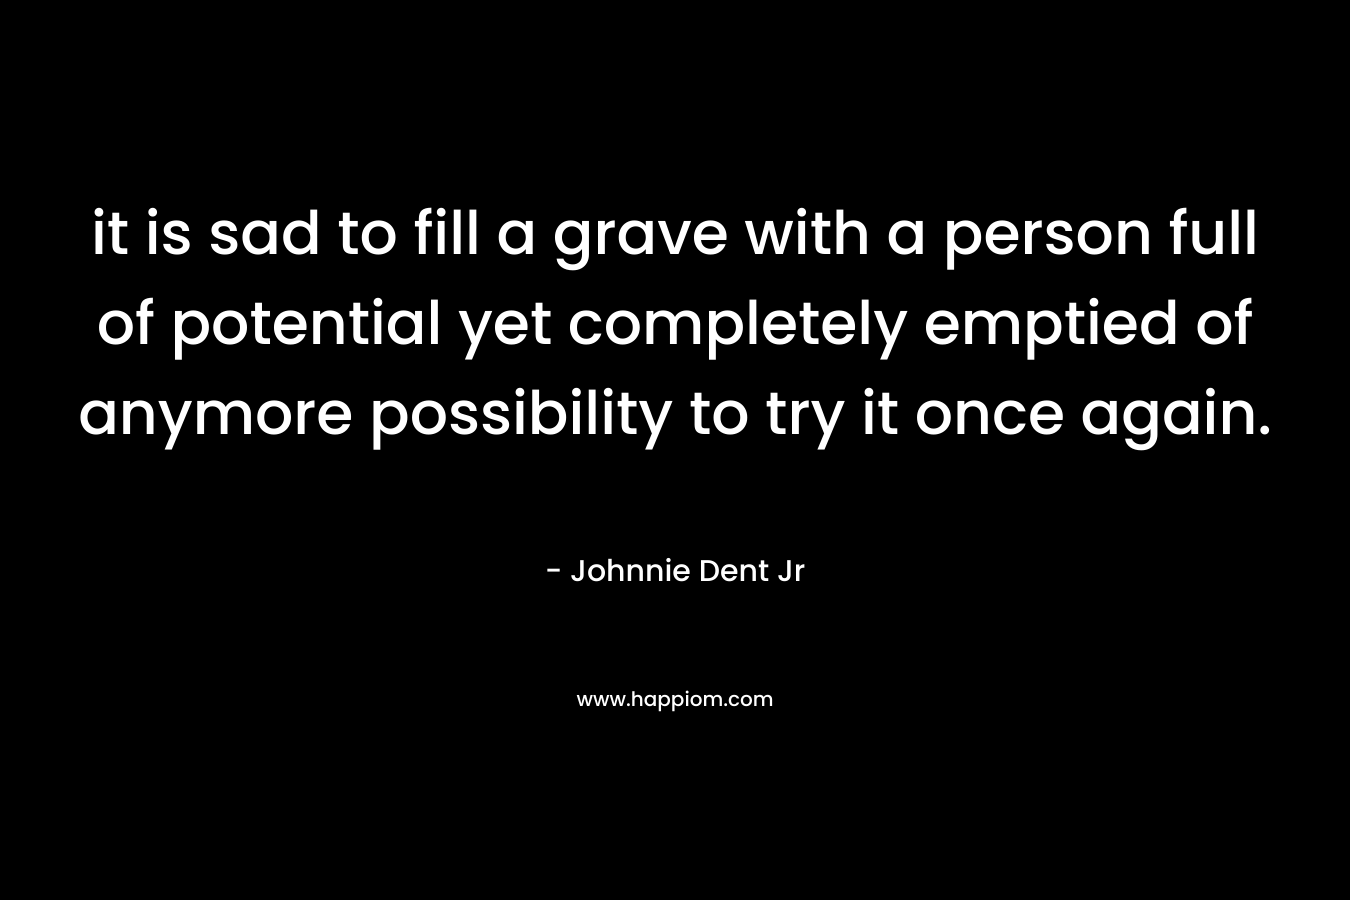 it is sad to fill a grave with a person full of potential yet completely emptied of anymore possibility to try it once again.